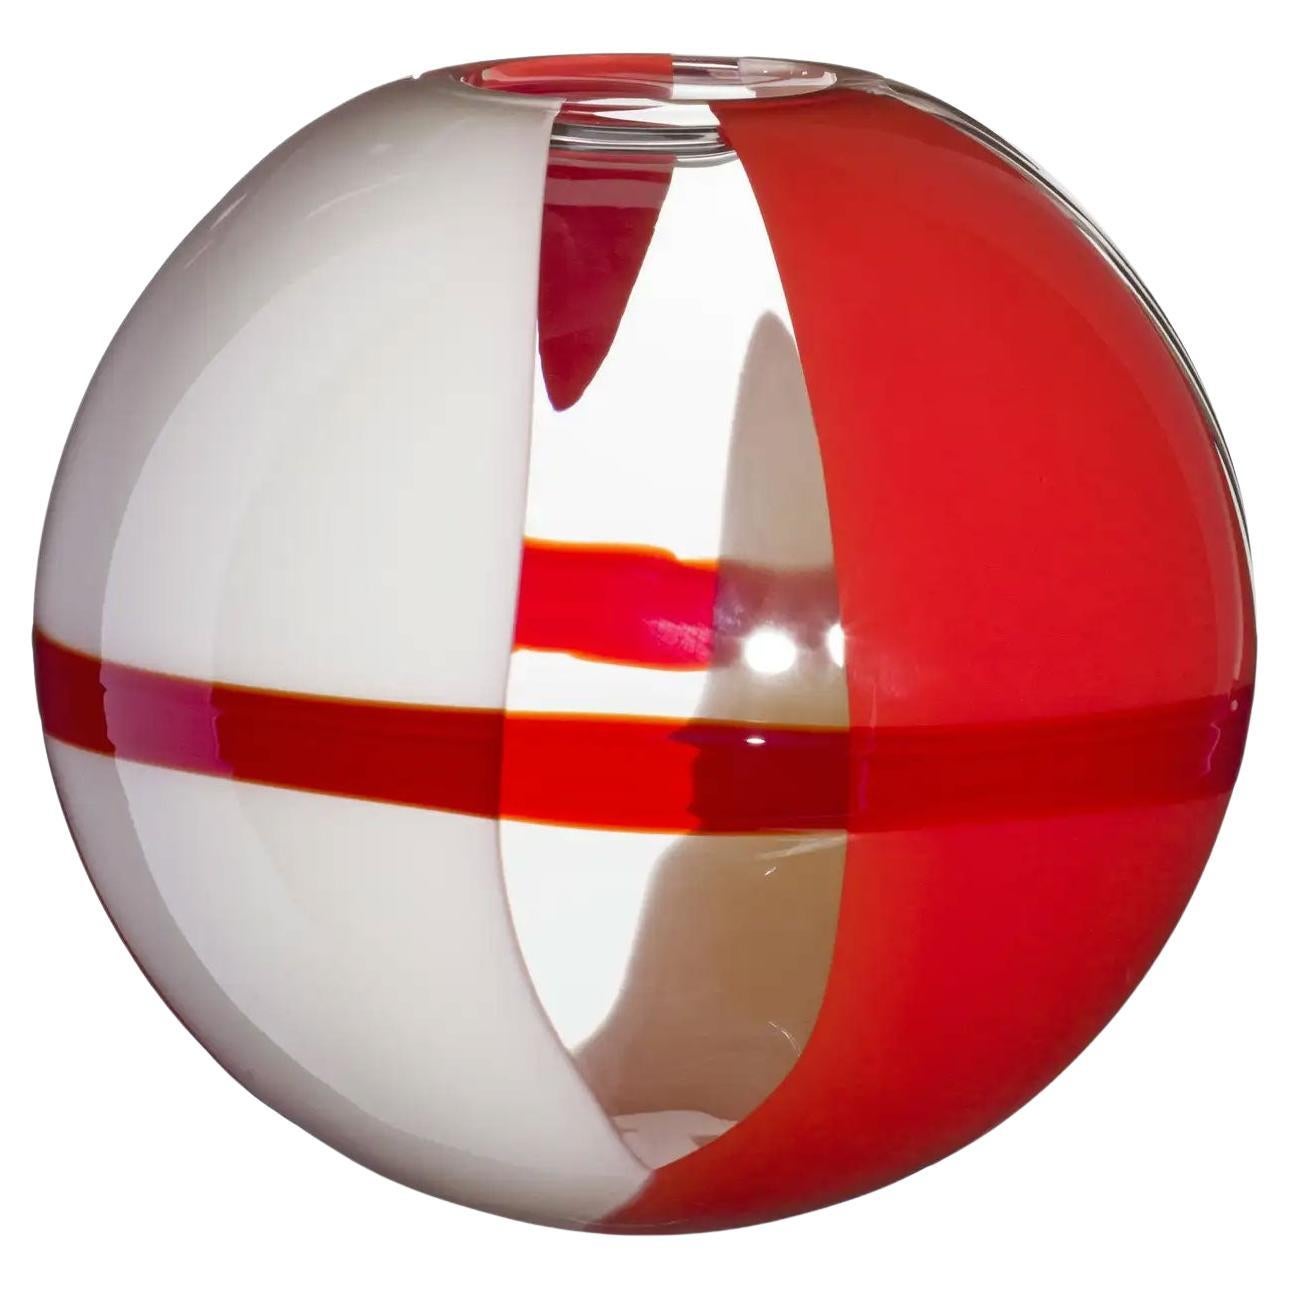 Large Sfera Vase in Orange, Red, and Ivory by Carlo Moretti